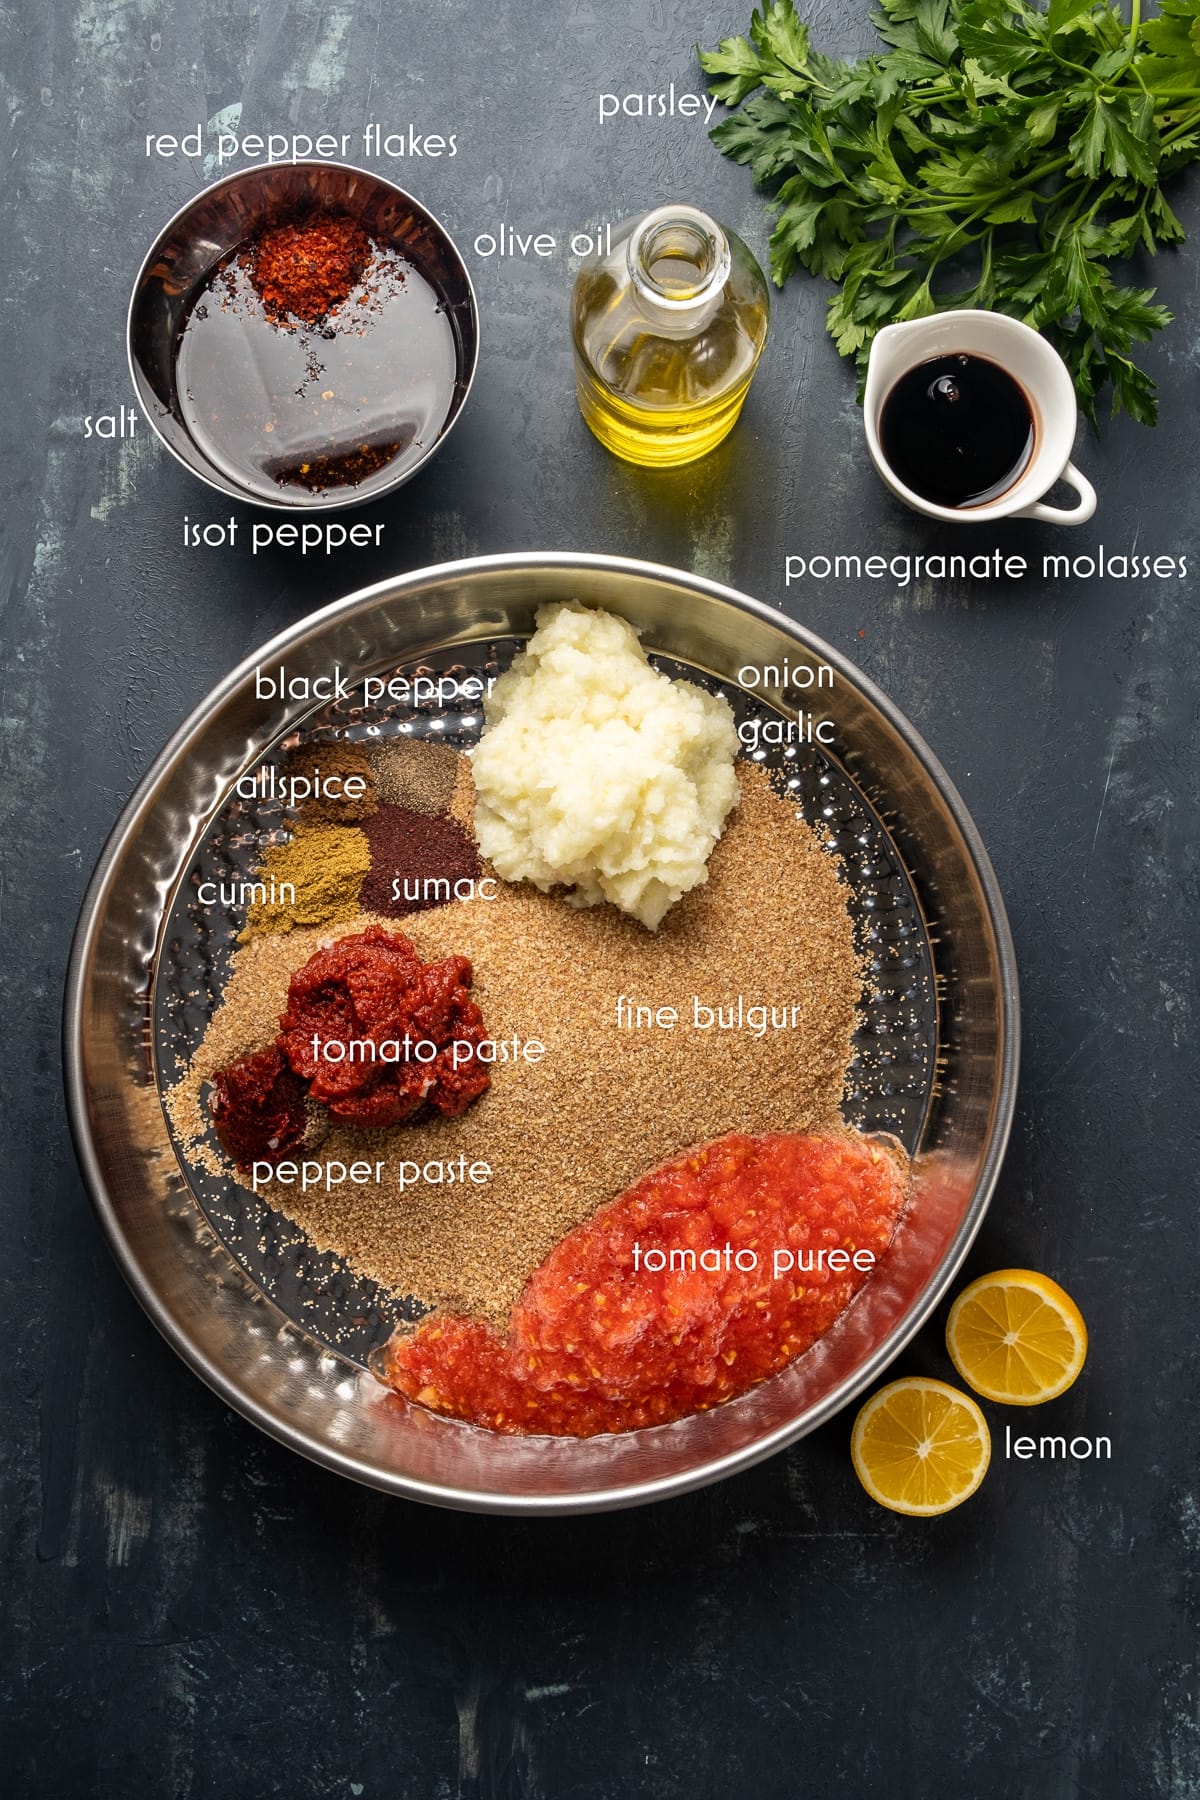 Fine bulgur, spices, pureed onion and garlic, pureed tomato, pepper and tomato paste in a traditional tray and pomegranate molasses, a mixture of olive oil, red pepper flakes and isot pepper in another bowl on the side.